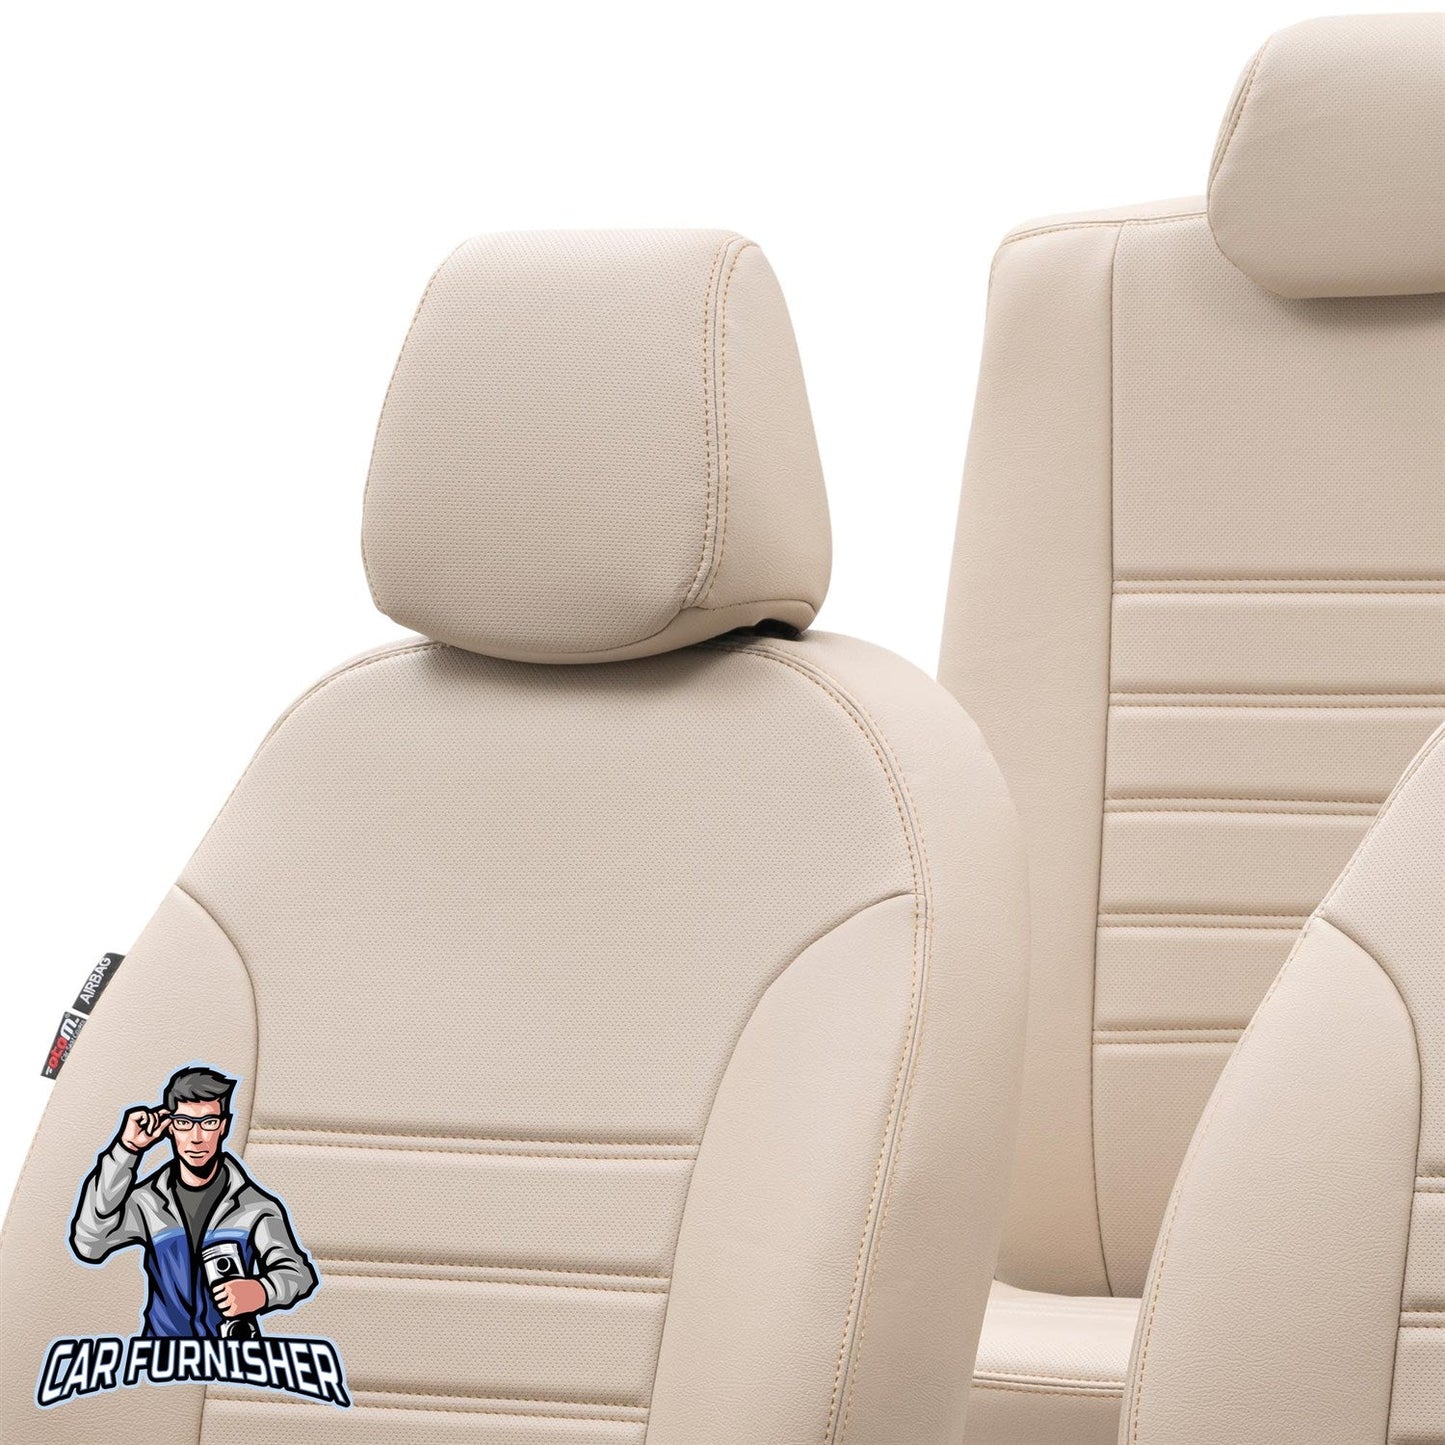 Kia Ceed Seat Covers Istanbul Leather Design Beige Leather